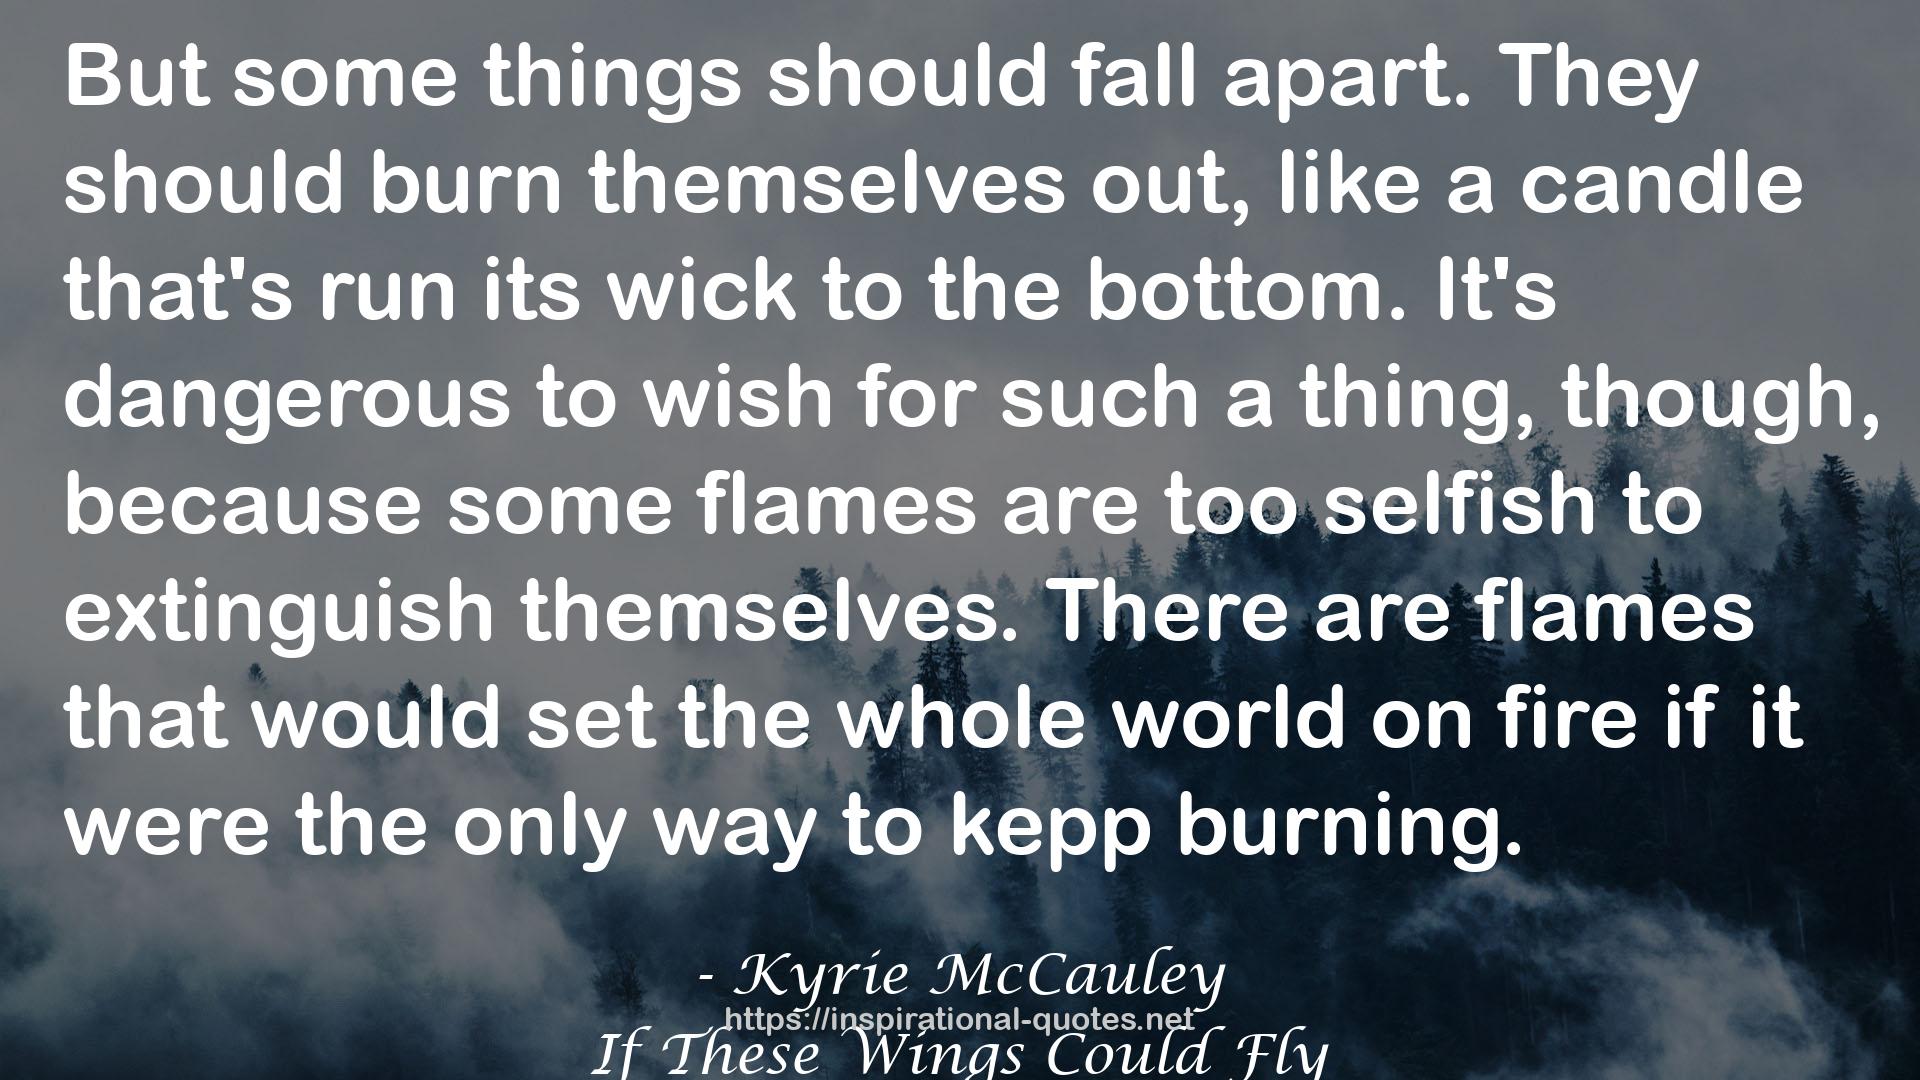 Kyrie McCauley QUOTES